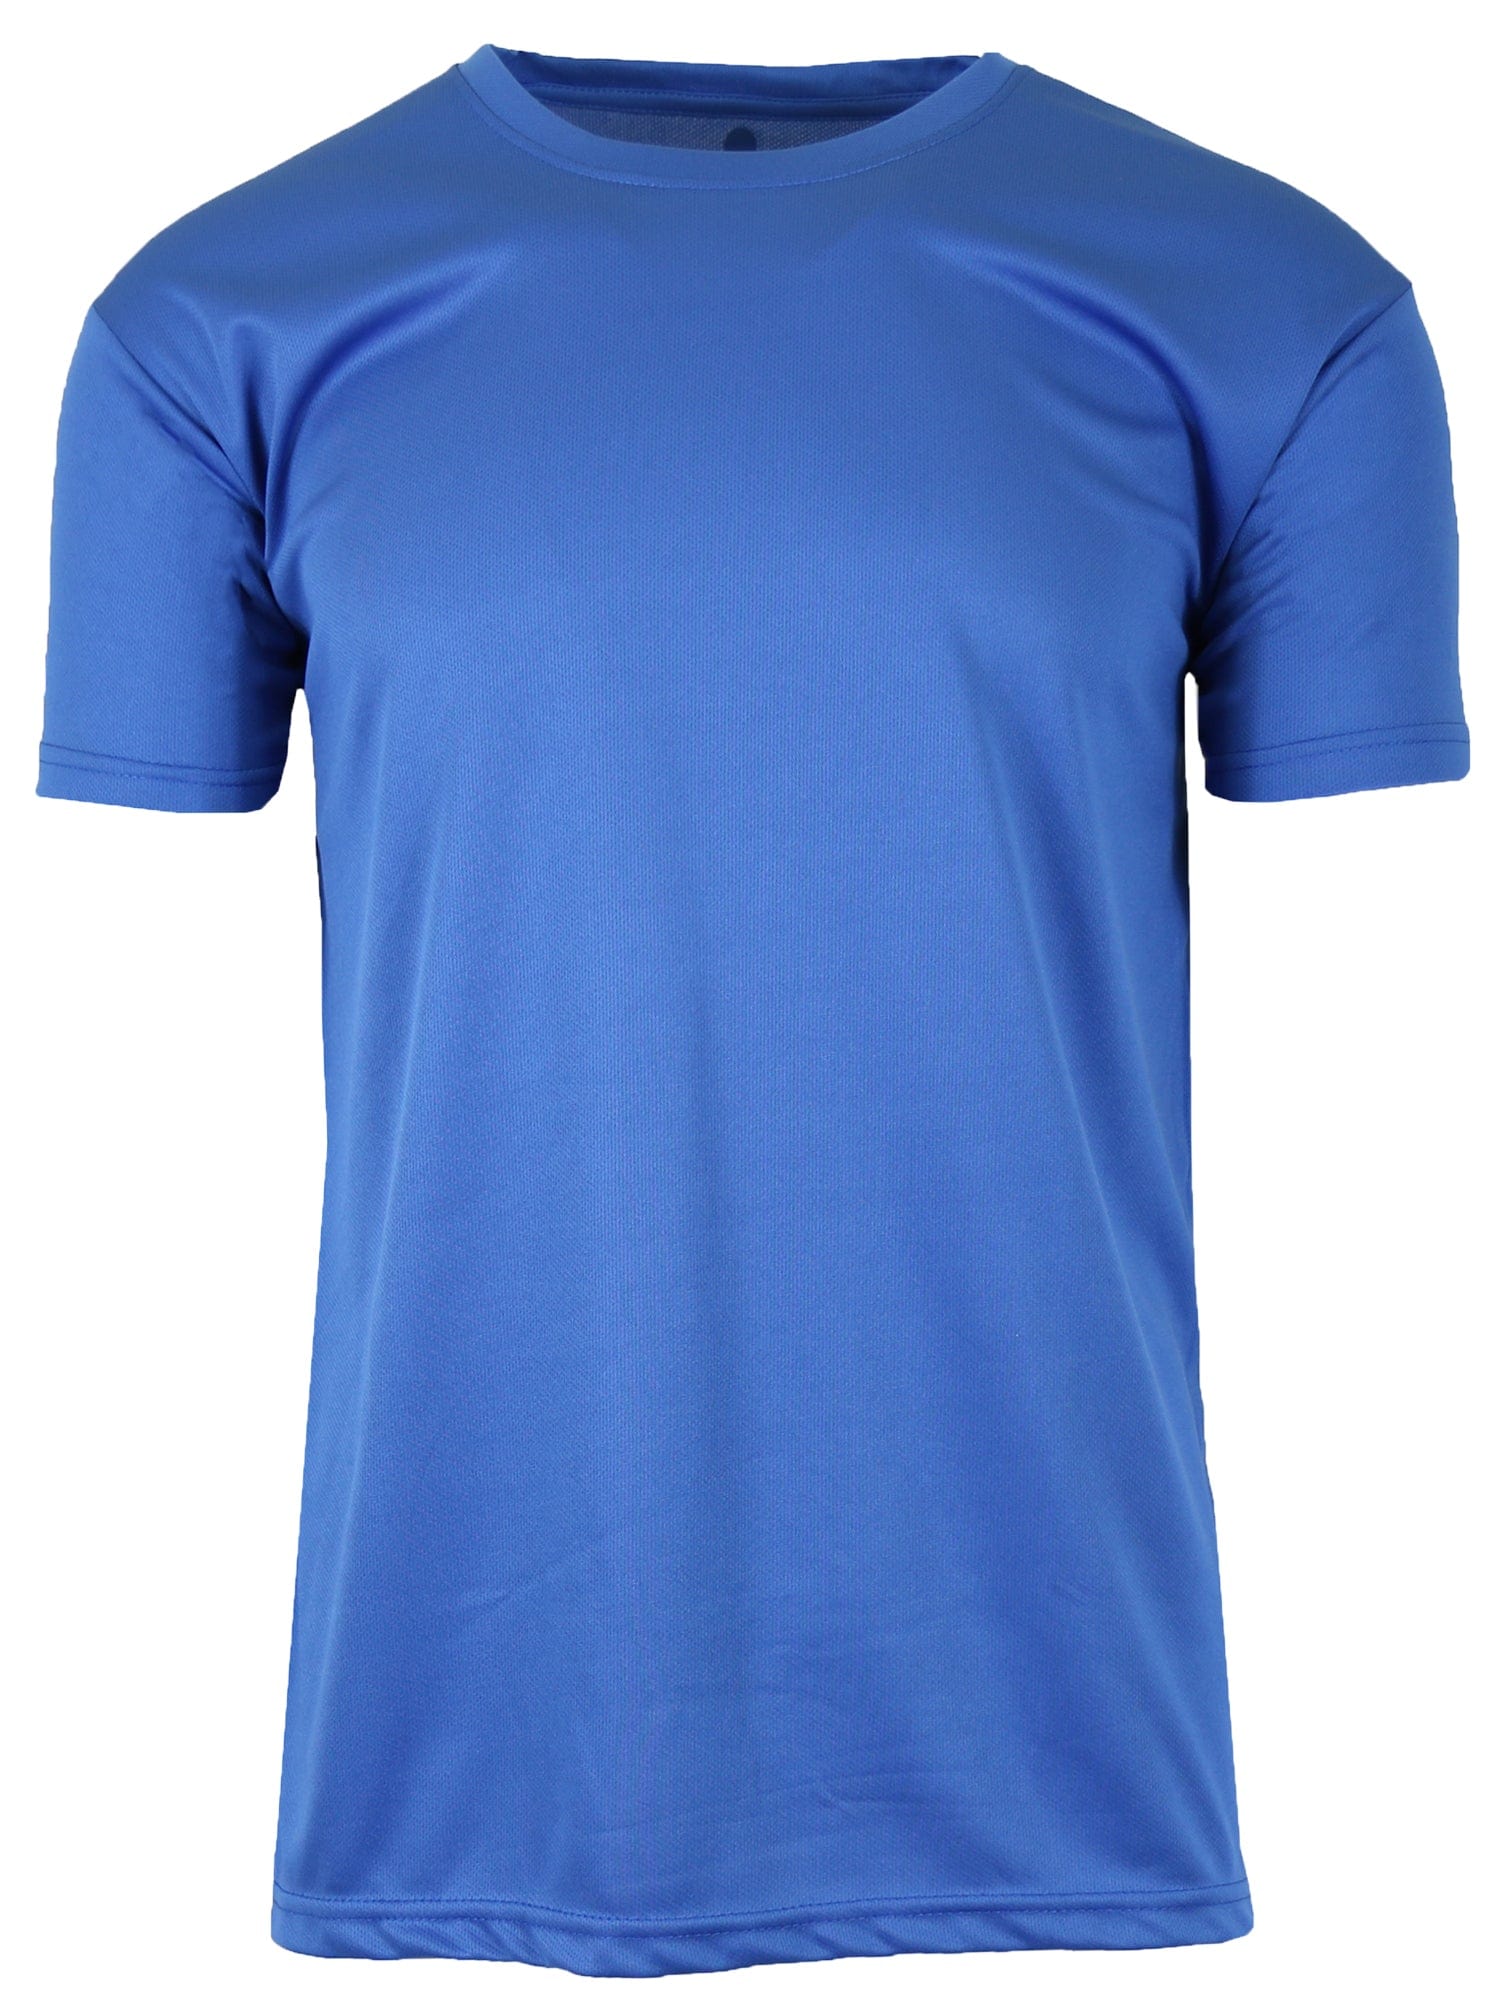 Men's Performance Moisture Wicking Active Short Sleeve & Muscle Tee - GalaxybyHarvic